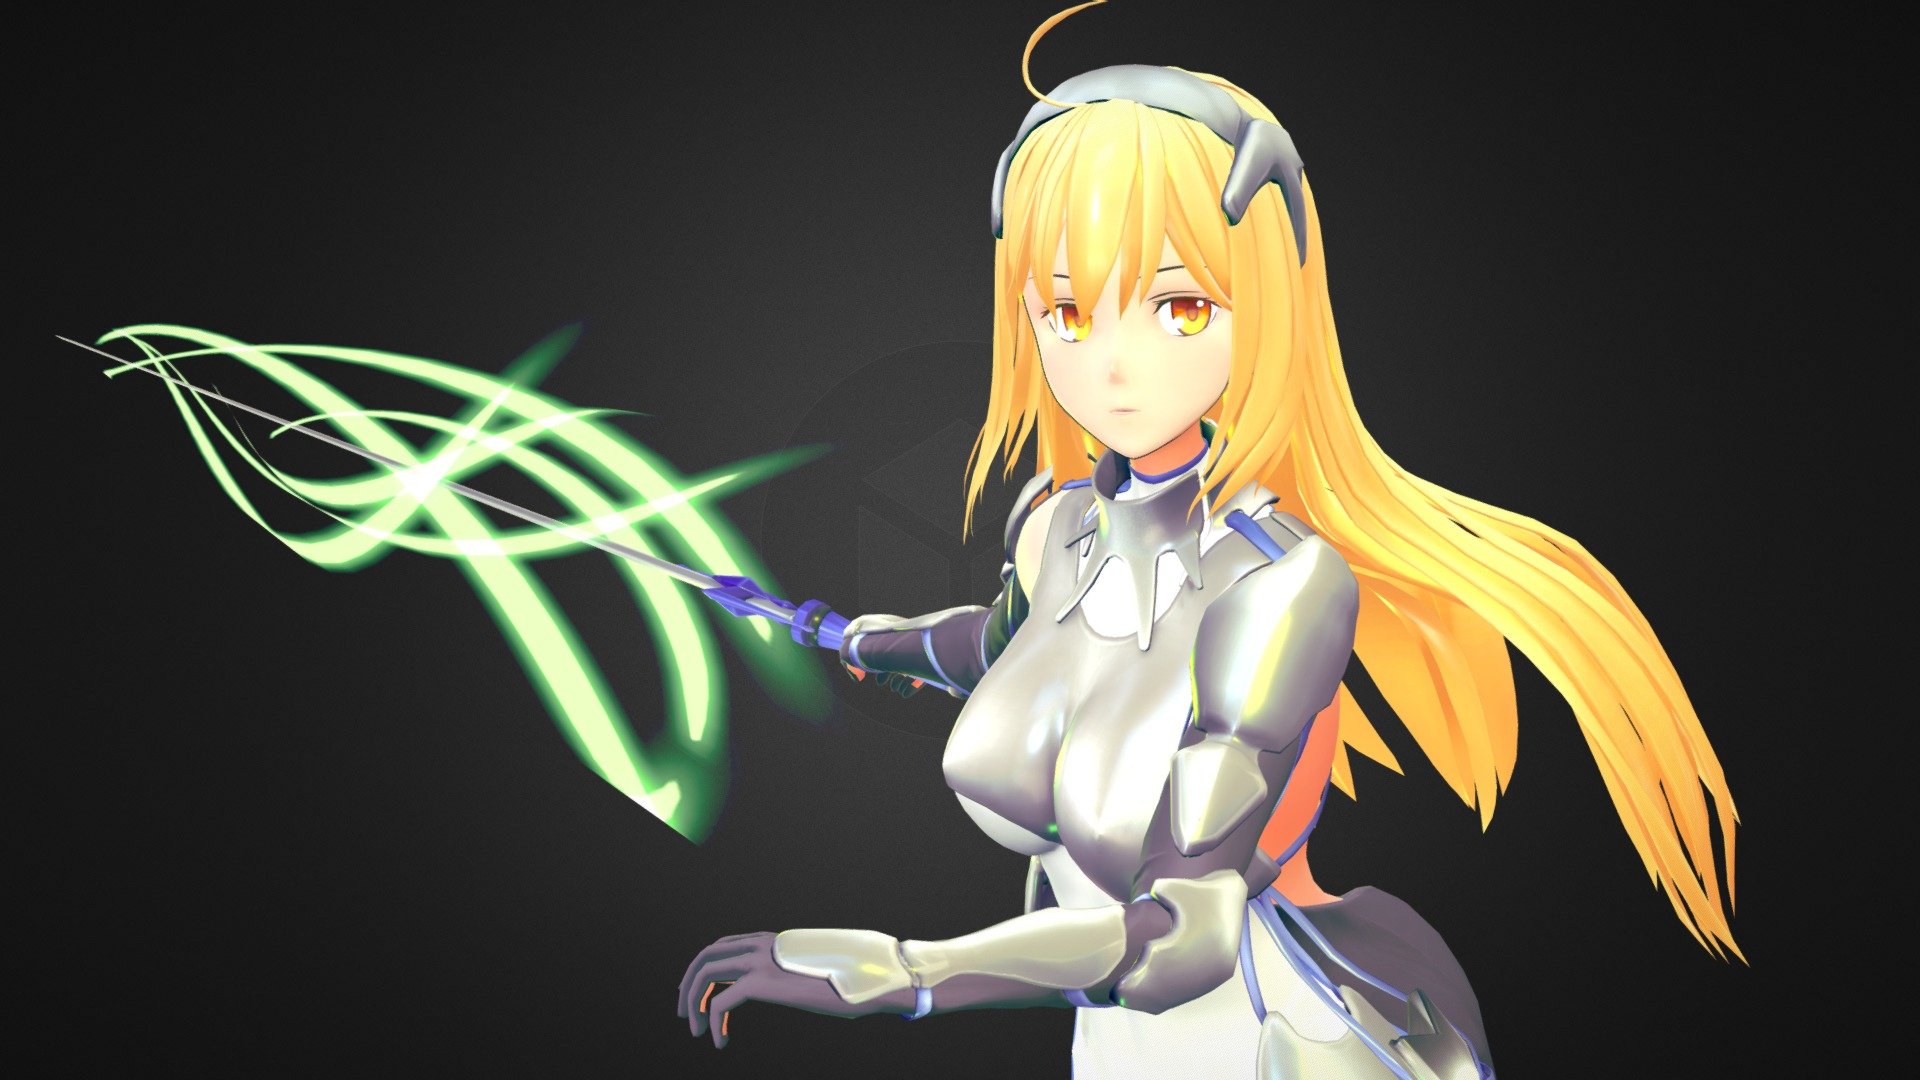 **Ais Wallenstein from Danmachi | Avatar3.0 for VRChat! **

■Join my support discord for more details : https://discord.com/invite/mytQvXZ






◆ 【Features】 ◆

■ Full body compatible

■ Visemes set

■ Large blendshape combinations

■ Eye Tracking

■ Radial menu options

・Change bunny set (5 avalaible)

・Bunny Ais toggle on/off

・Bunny Ear Swing Menu

・Armor Toggle on/off

・Sword Toggle

■ Hand Gestures - Ais Wallenstein -  DanMachi [VRChat Av3.0] - Buy Royalty Free 3D model by codealdnoah (@deuschanz) 3d model